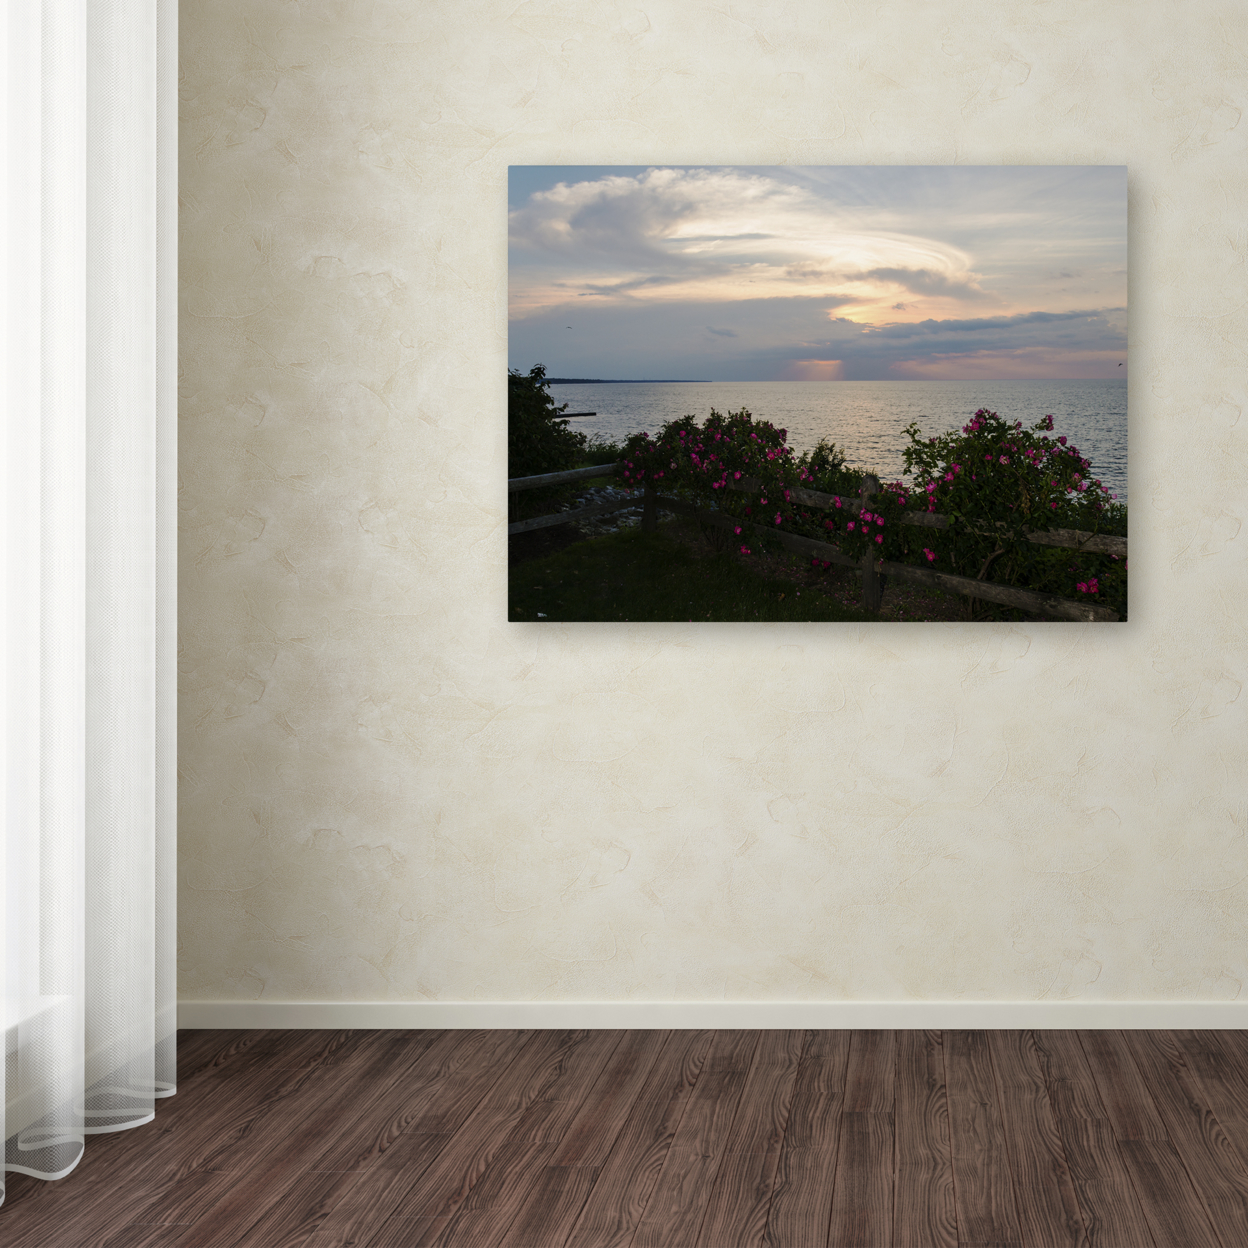 Kurt Shaffer 'Roses In Bloom Along The Lake' Canvas Wall Art 35 X 47 Inches